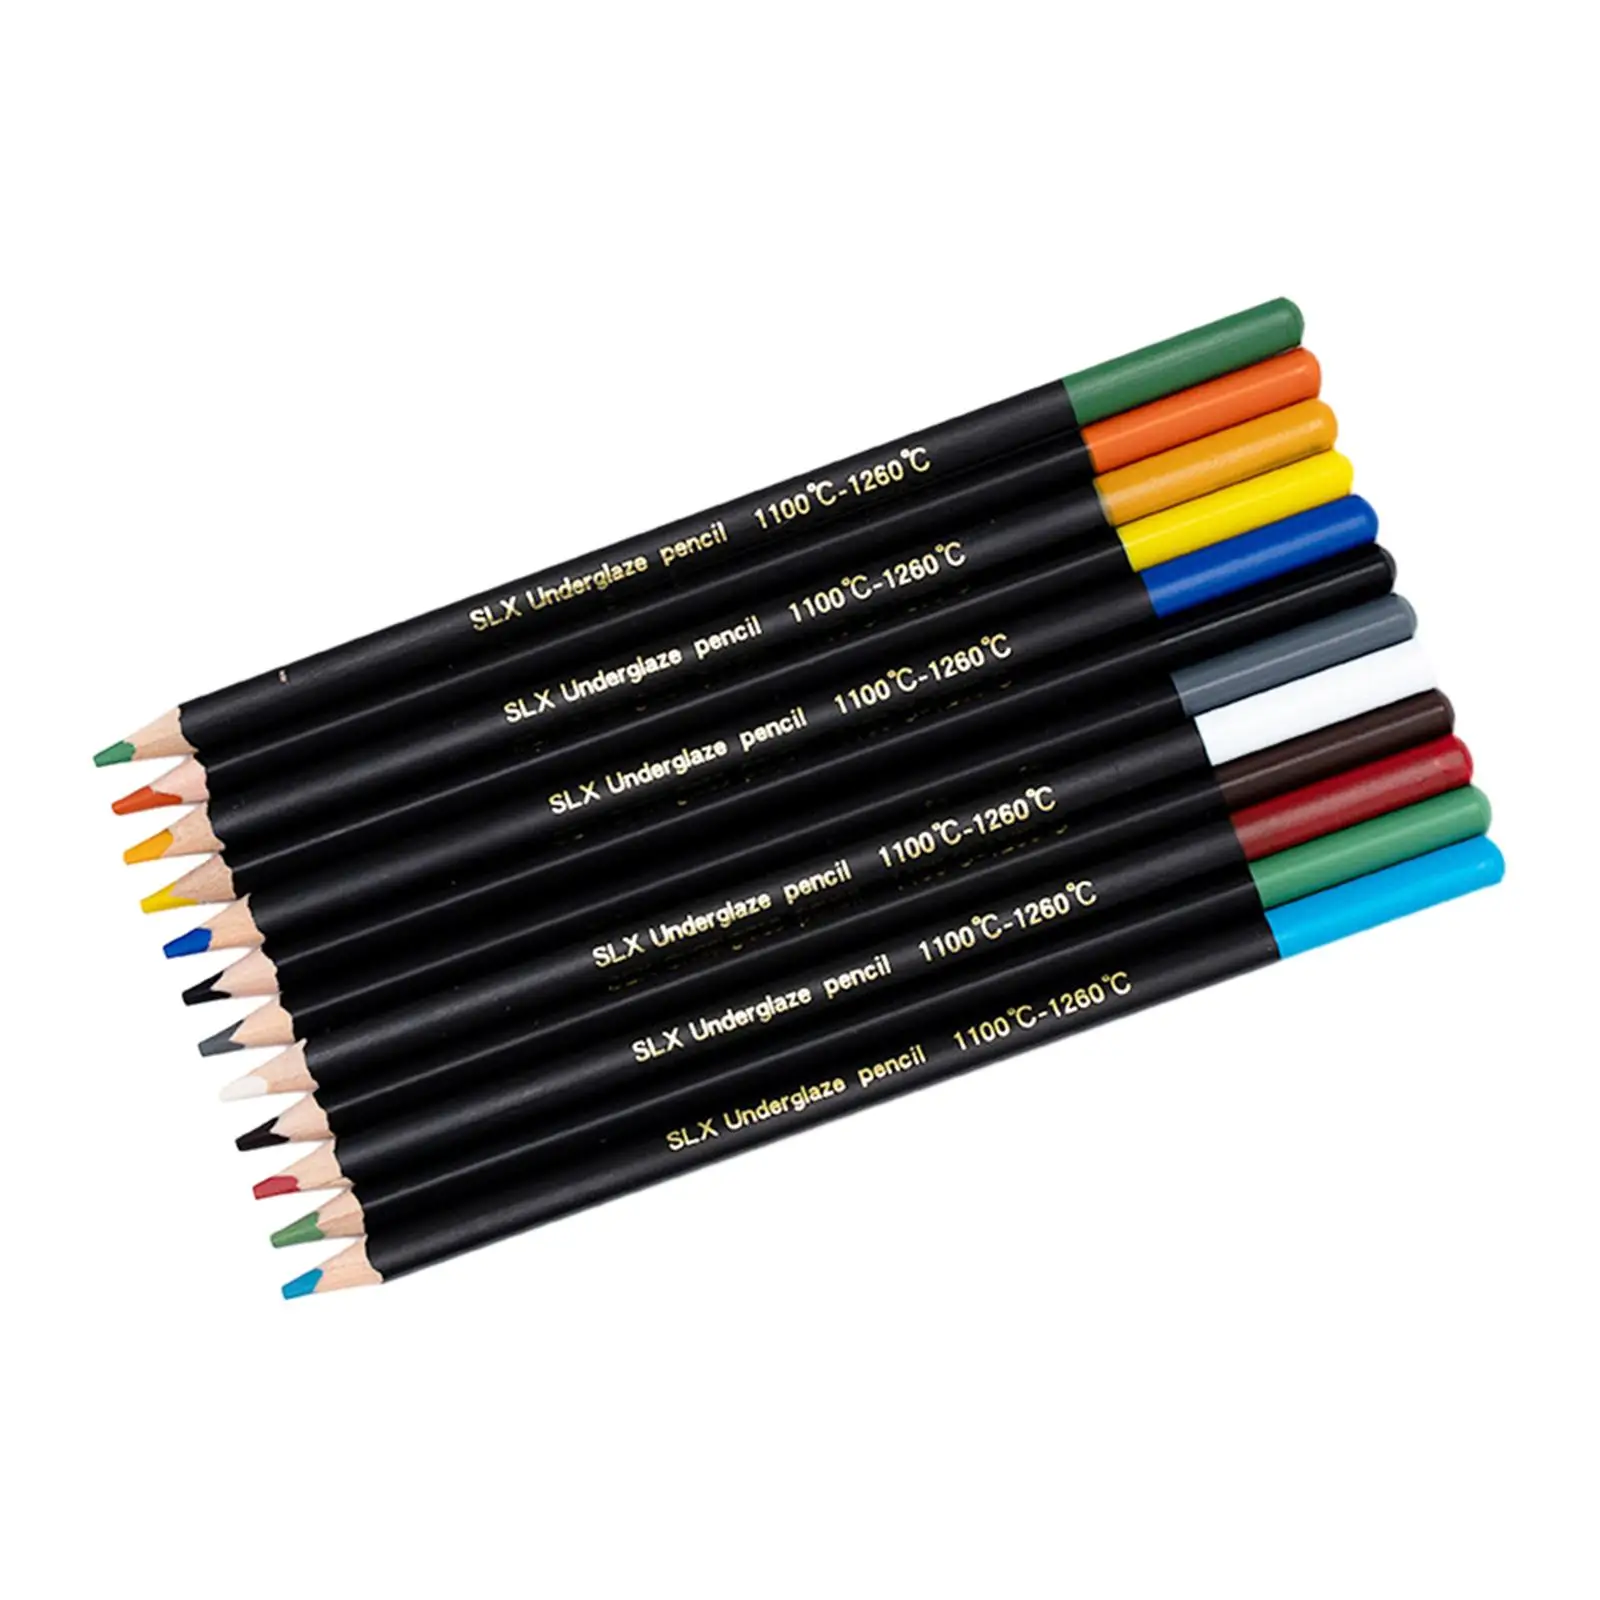 Colored Pencils with Case with Eraser Coloring Pencils for Hand Painting Art Craft Supplies Coloring Books Sketching Adults Kids